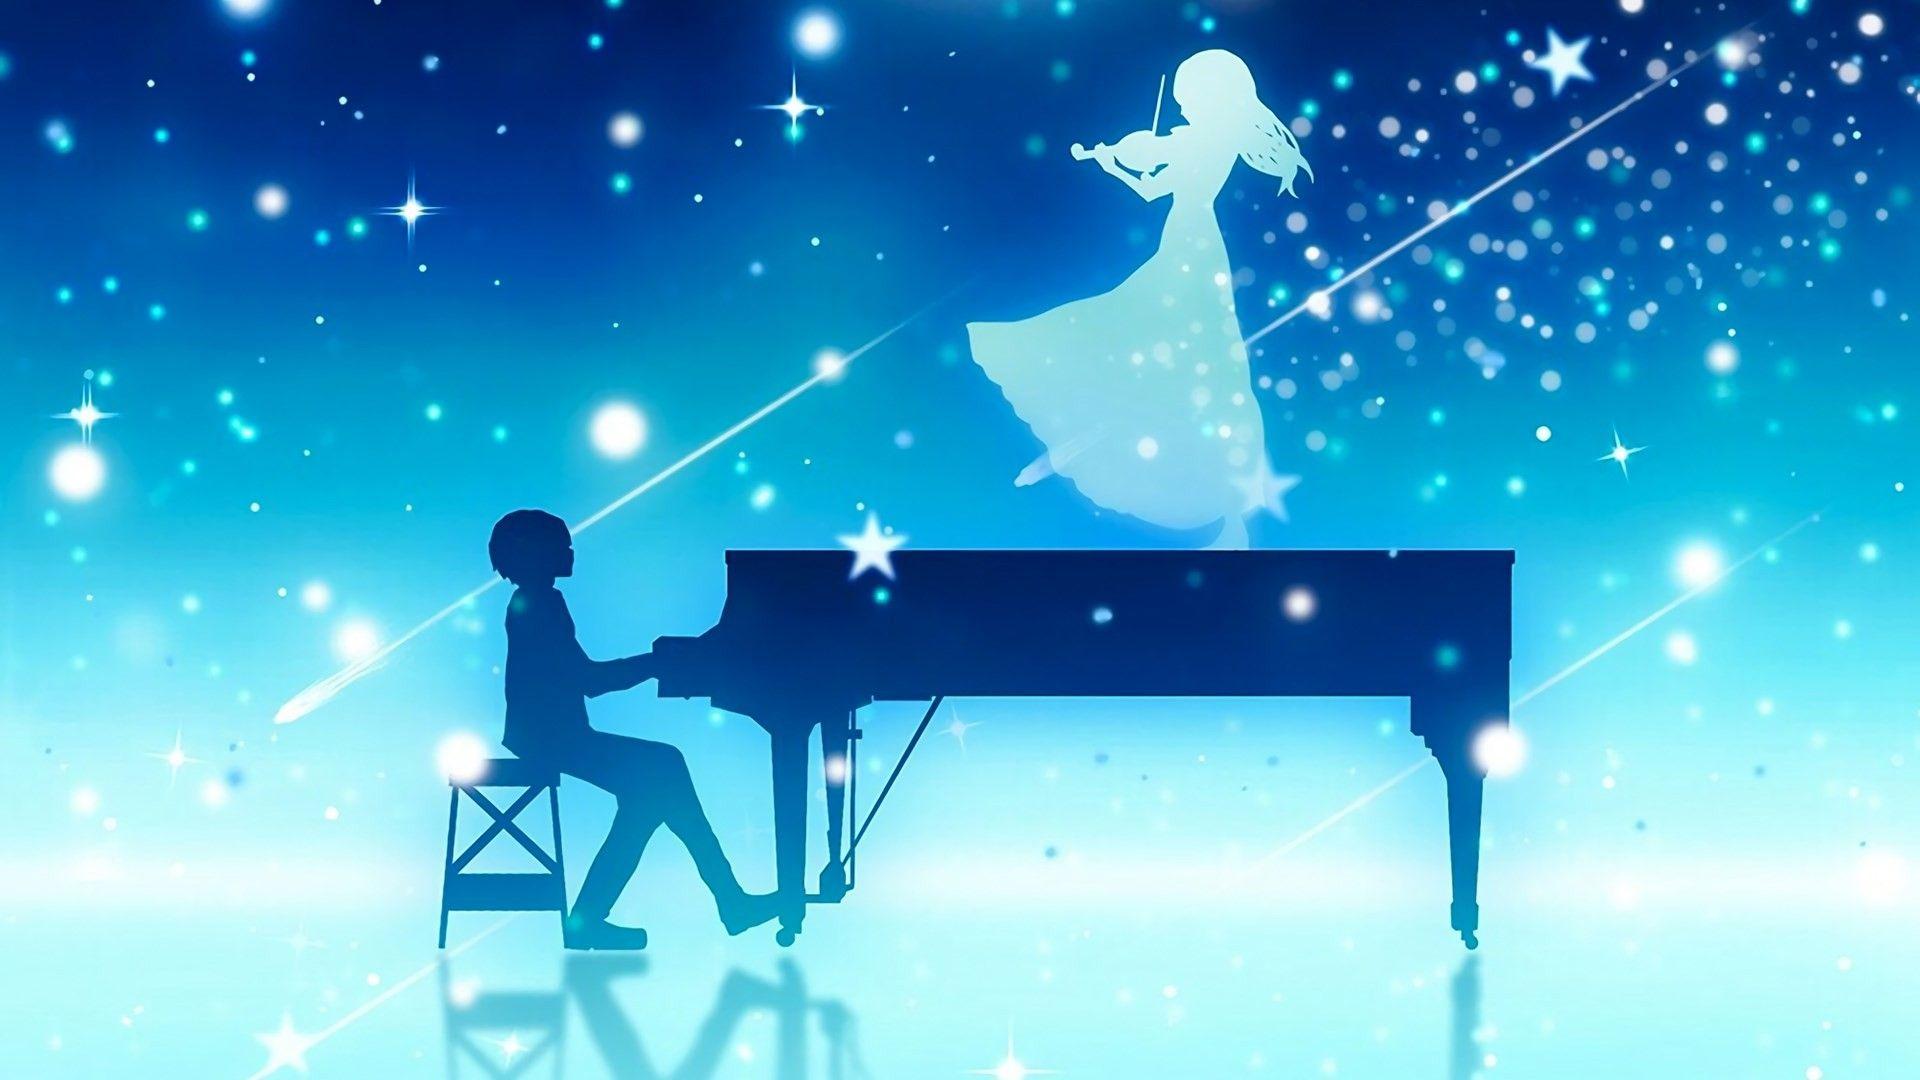 Your Lie In April Wallpapers Top Free Your Lie In April